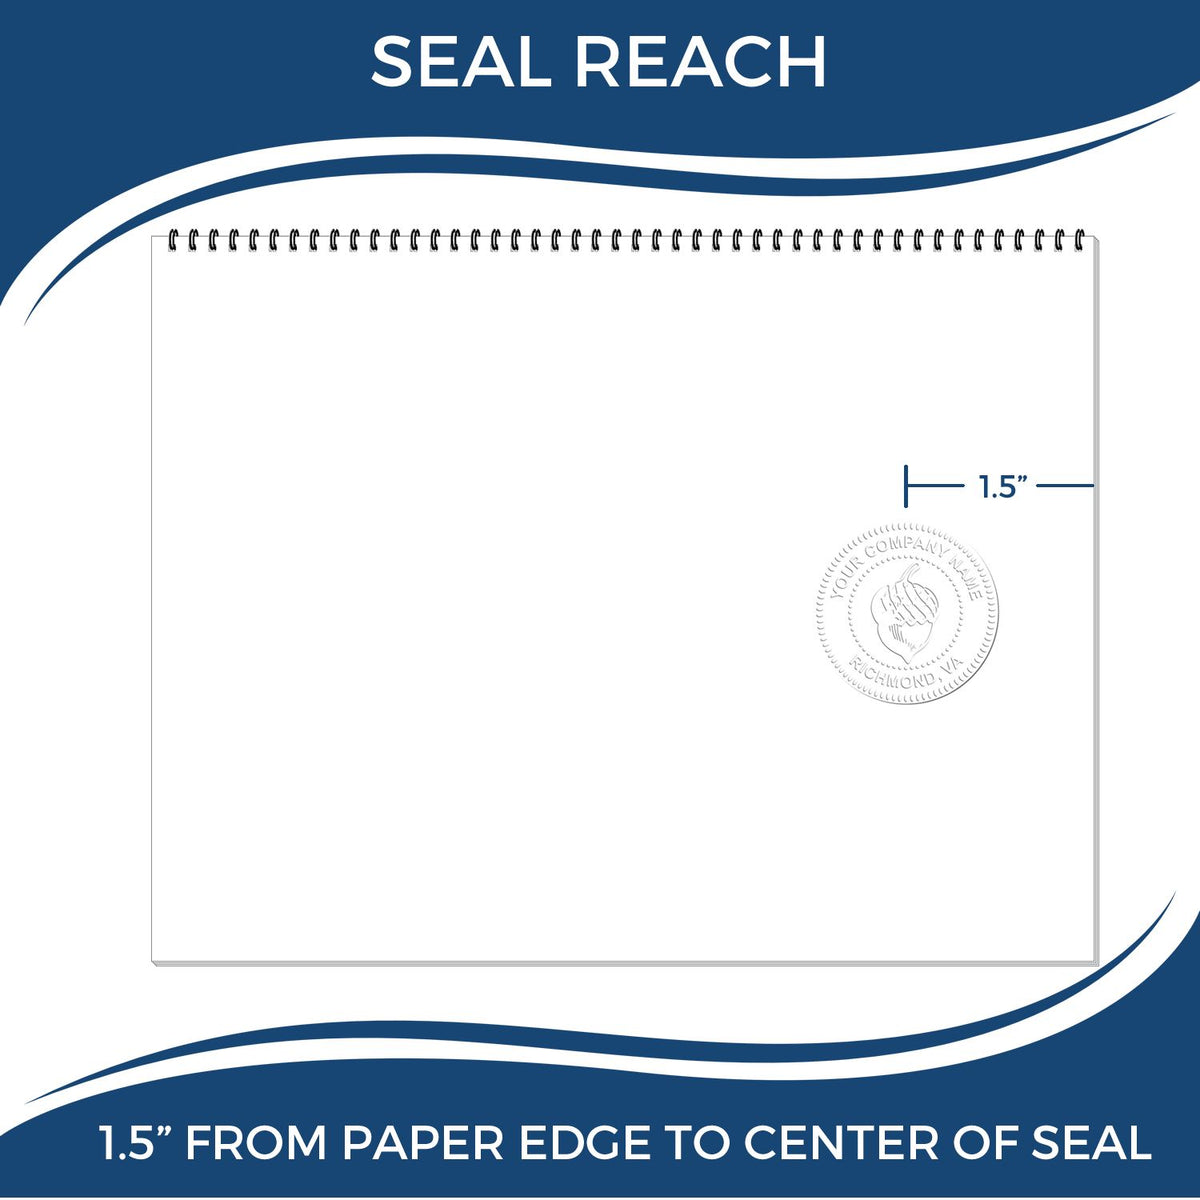 An infographic showing the seal reach which is represented by a ruler and a miniature seal image of the Hybrid Vermont Architect Seal